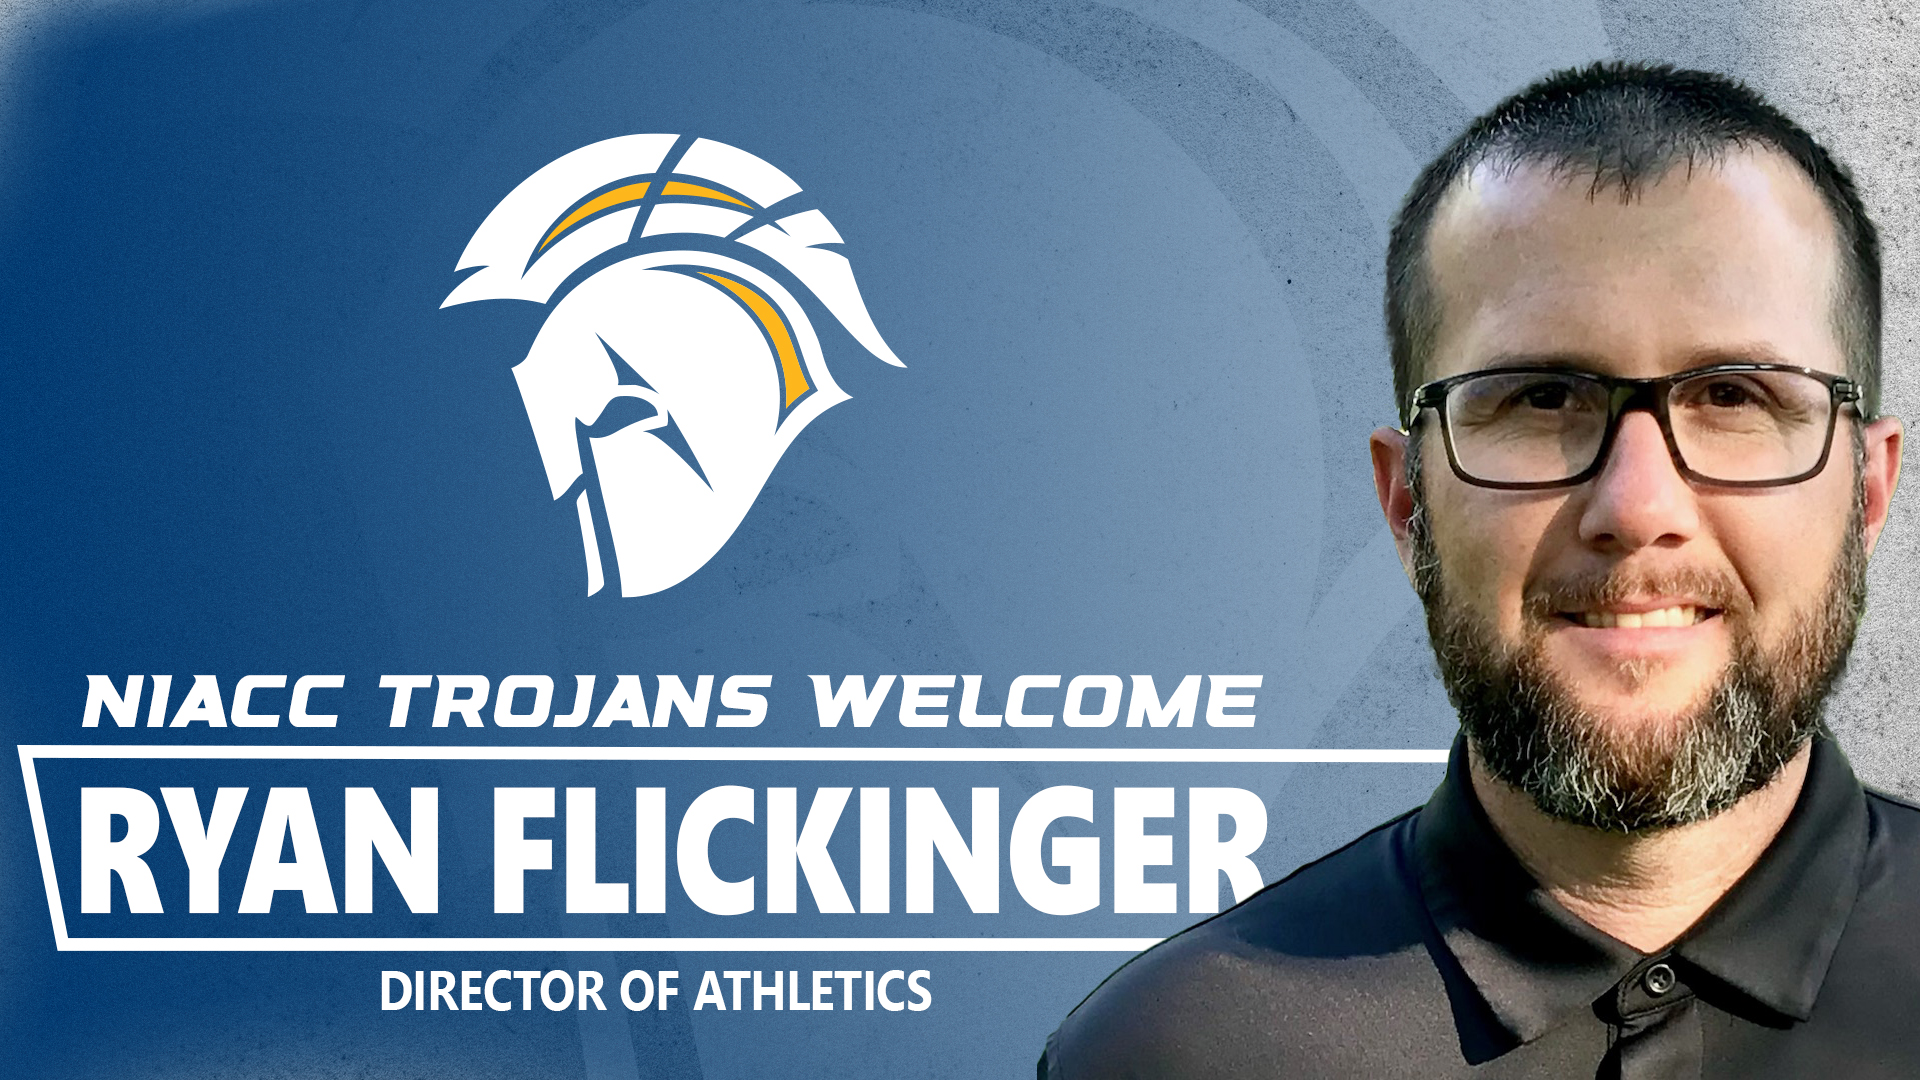 Flickinger selected as new NIACC athletic director